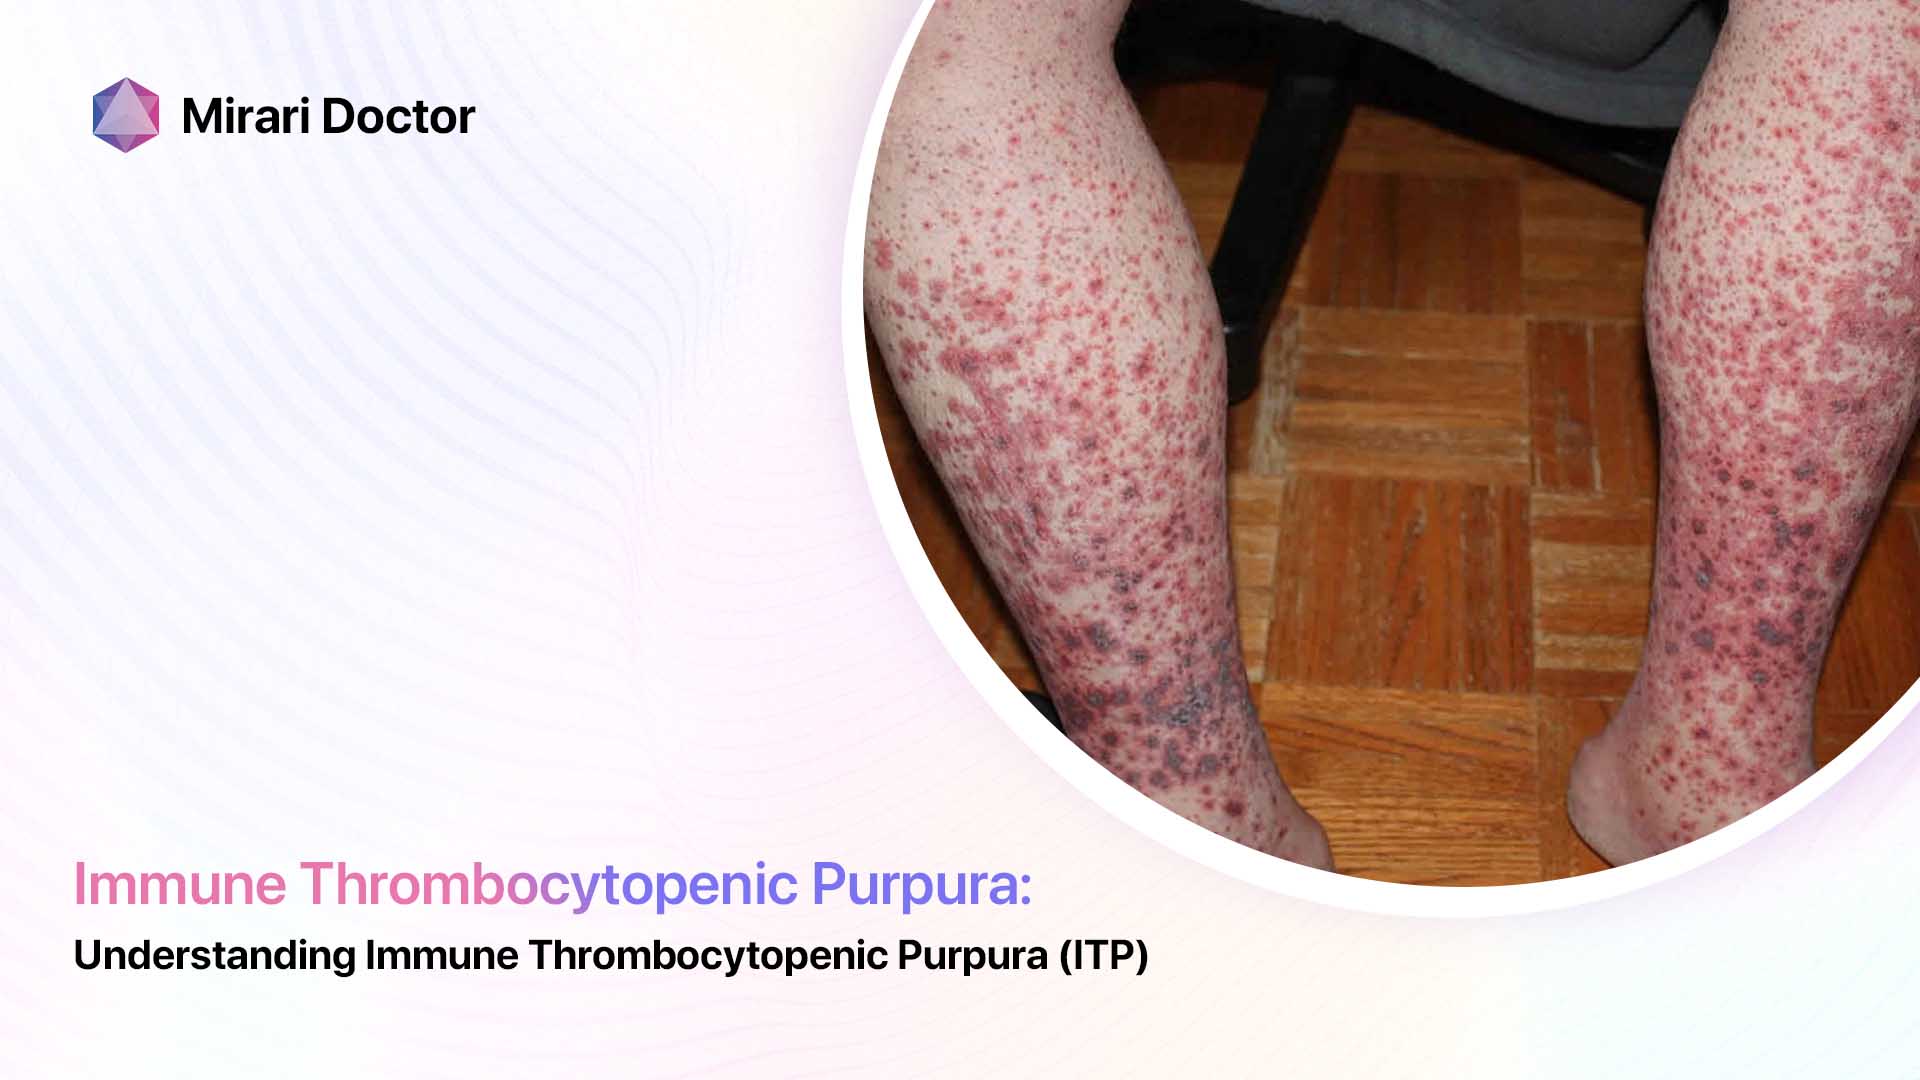 Featured image for “Understanding Immune Thrombocytopenic Purpura (ITP) and its ICD-10 Code Classification”